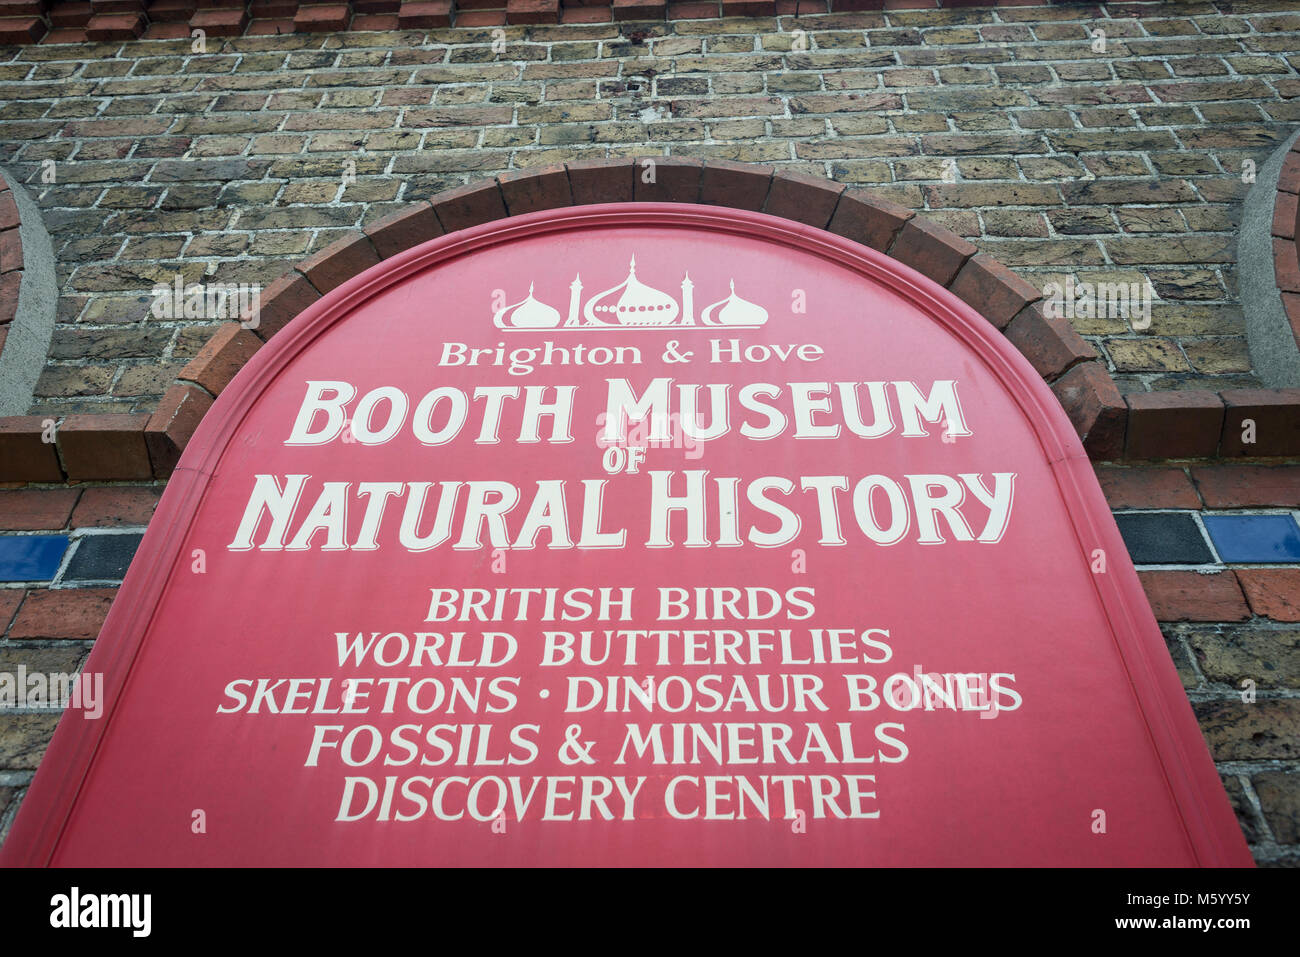 details of inside the storage and archive rooms of Brighton & Hove's Booth Museum of Natural Histroy Stock Photo